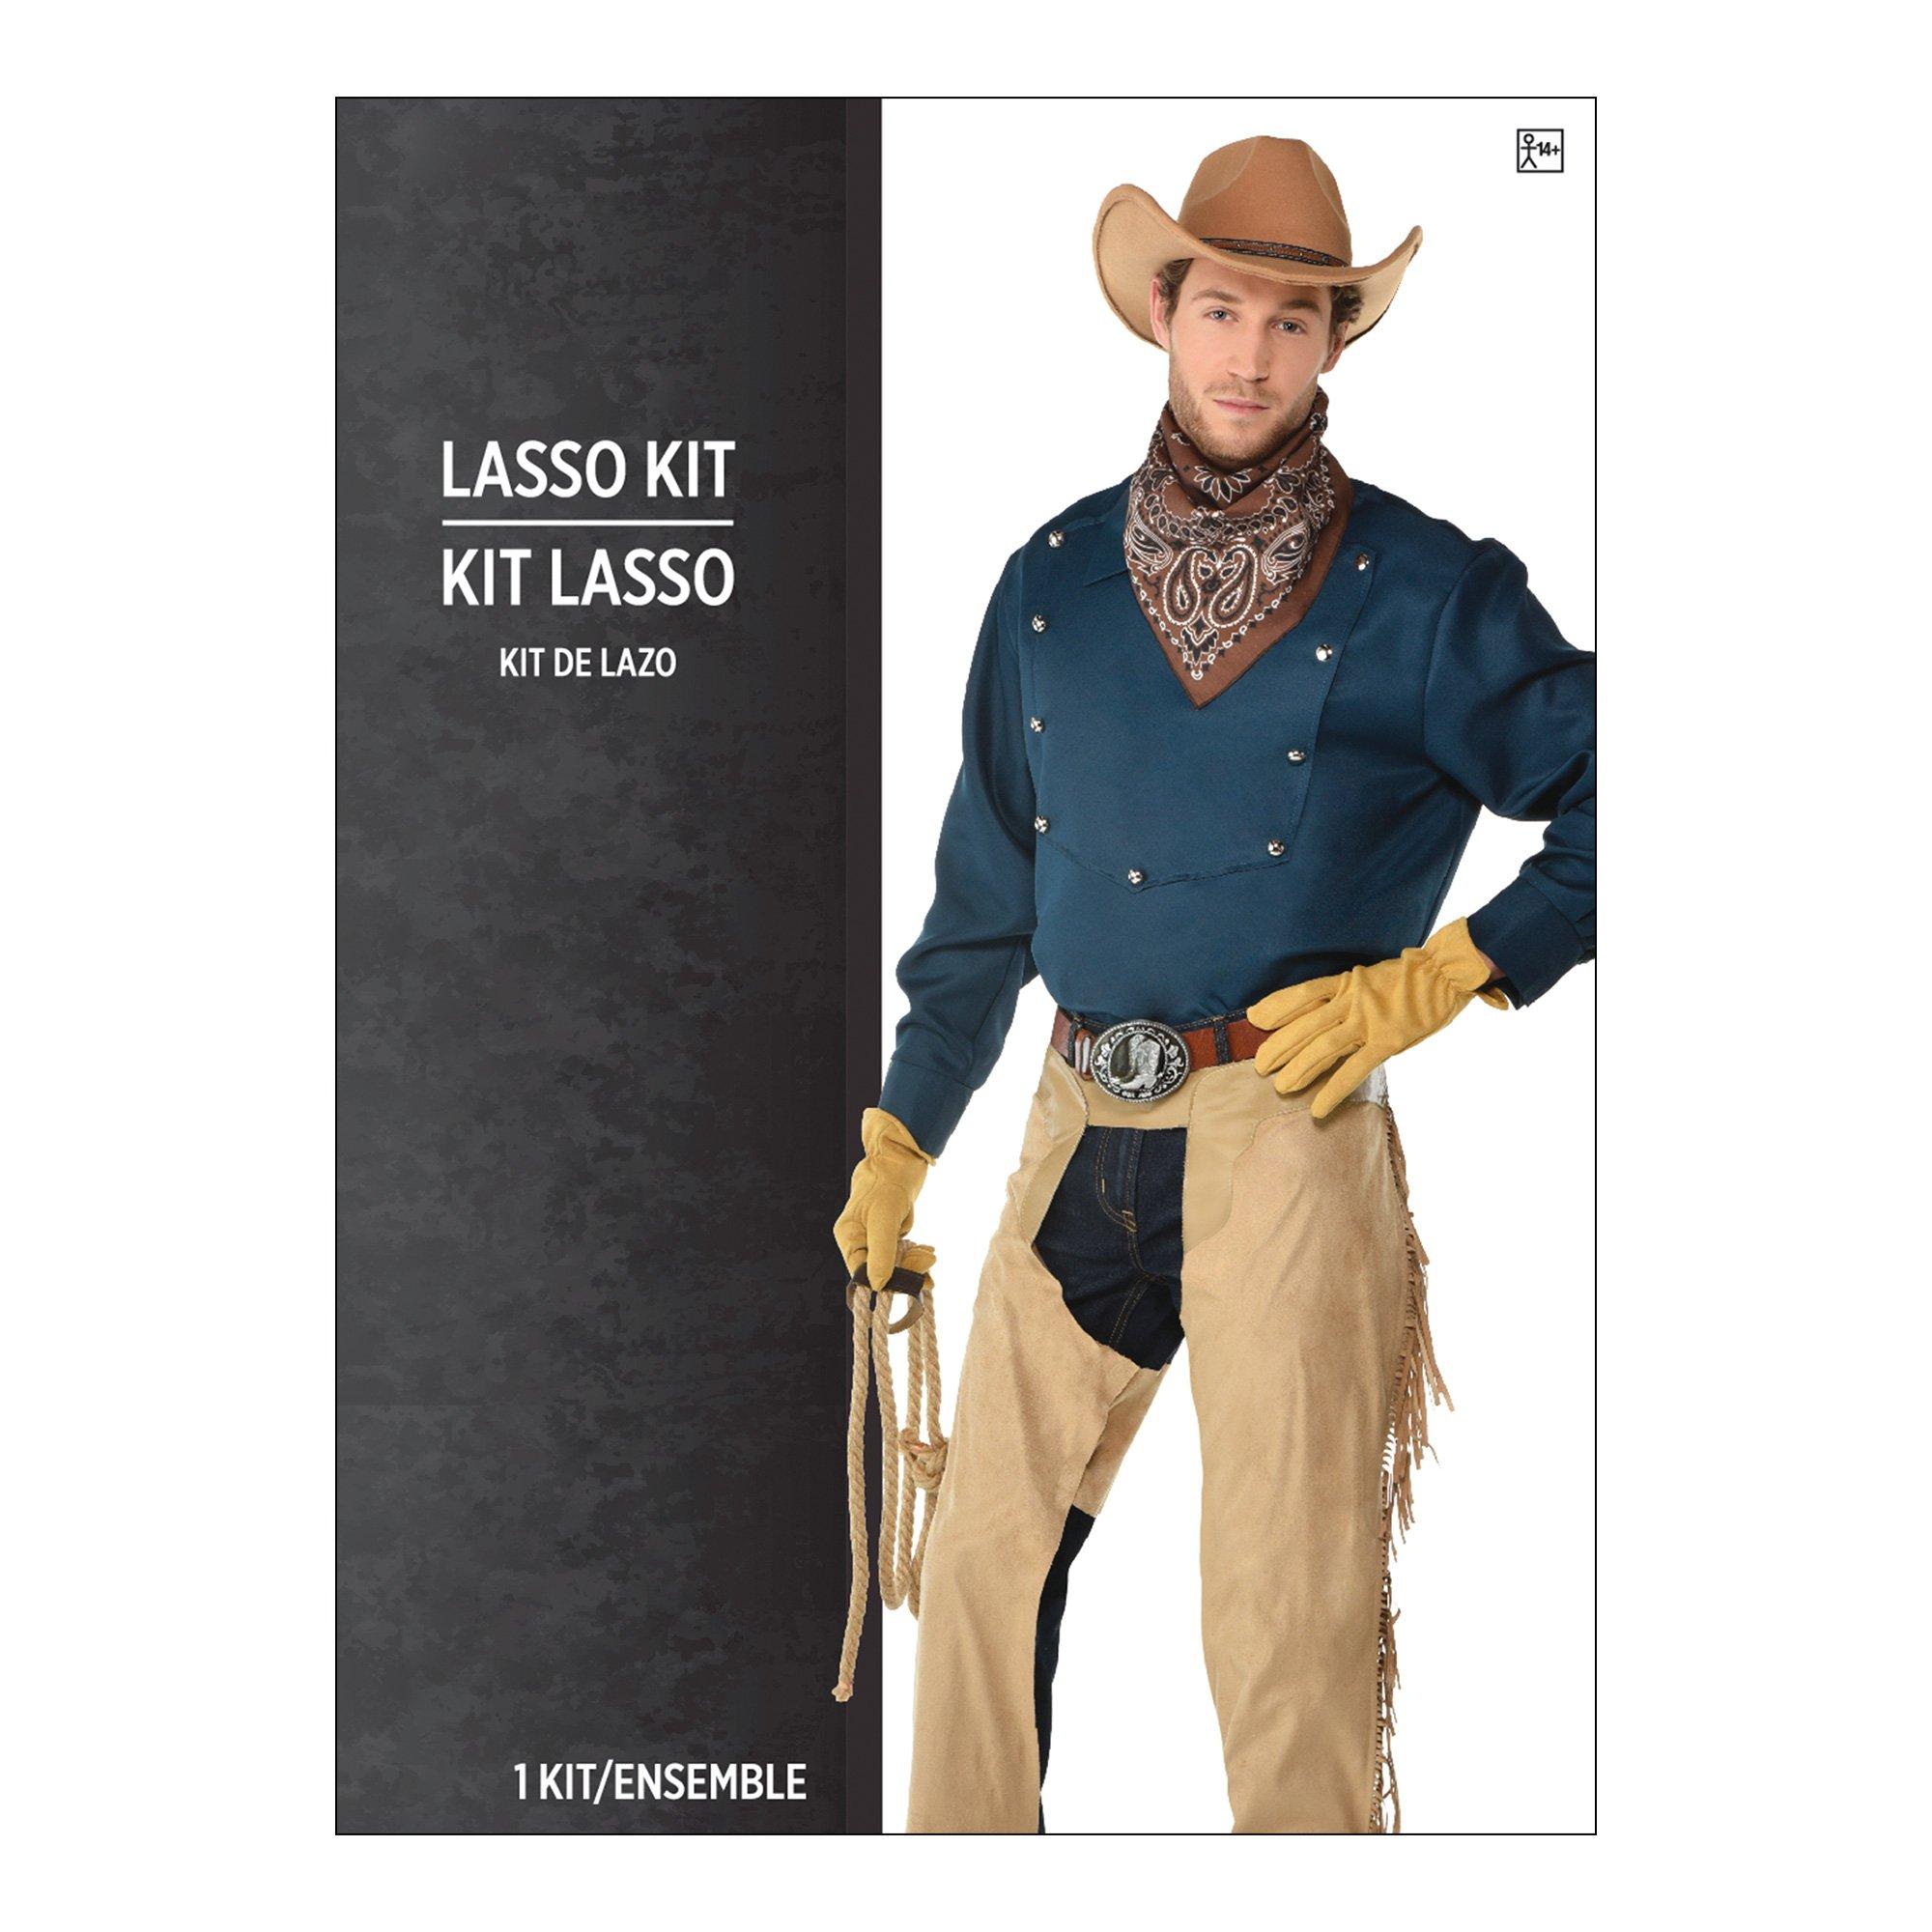 Cowboy Costume Accessory Kit for Adults